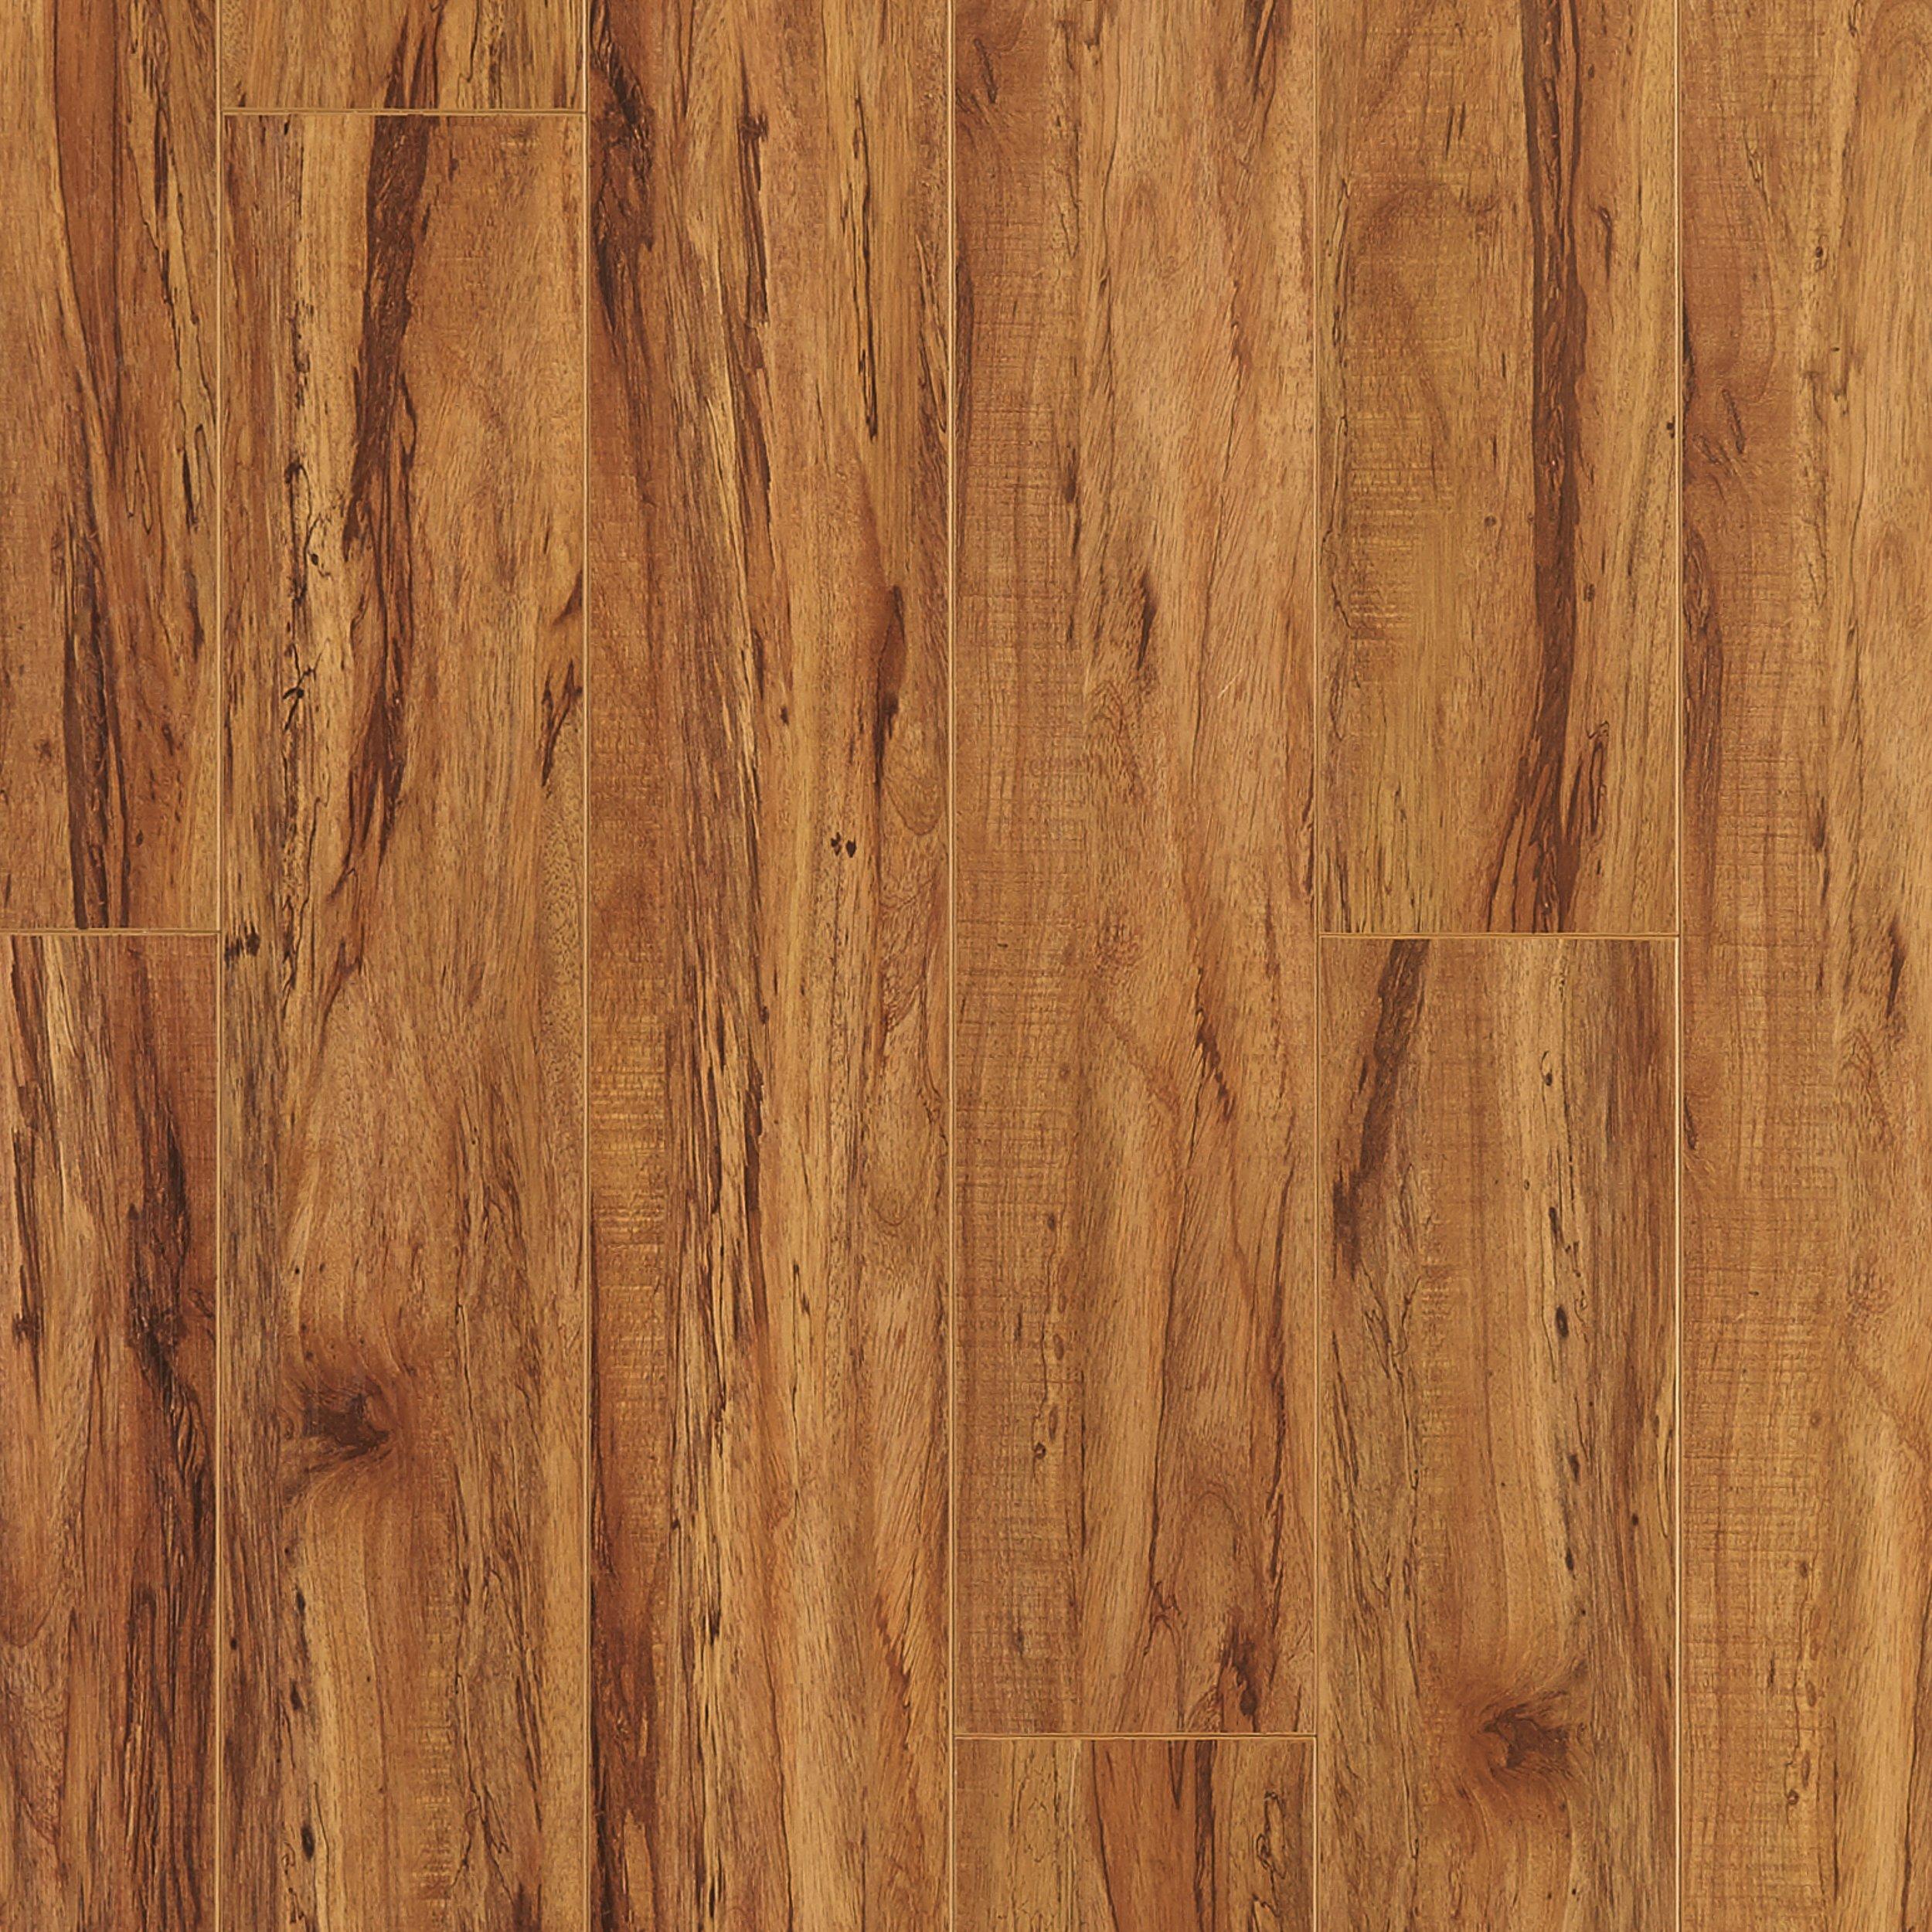 Tuscan Olive Hand Scraped Laminate 12mm 100130475 Floor And